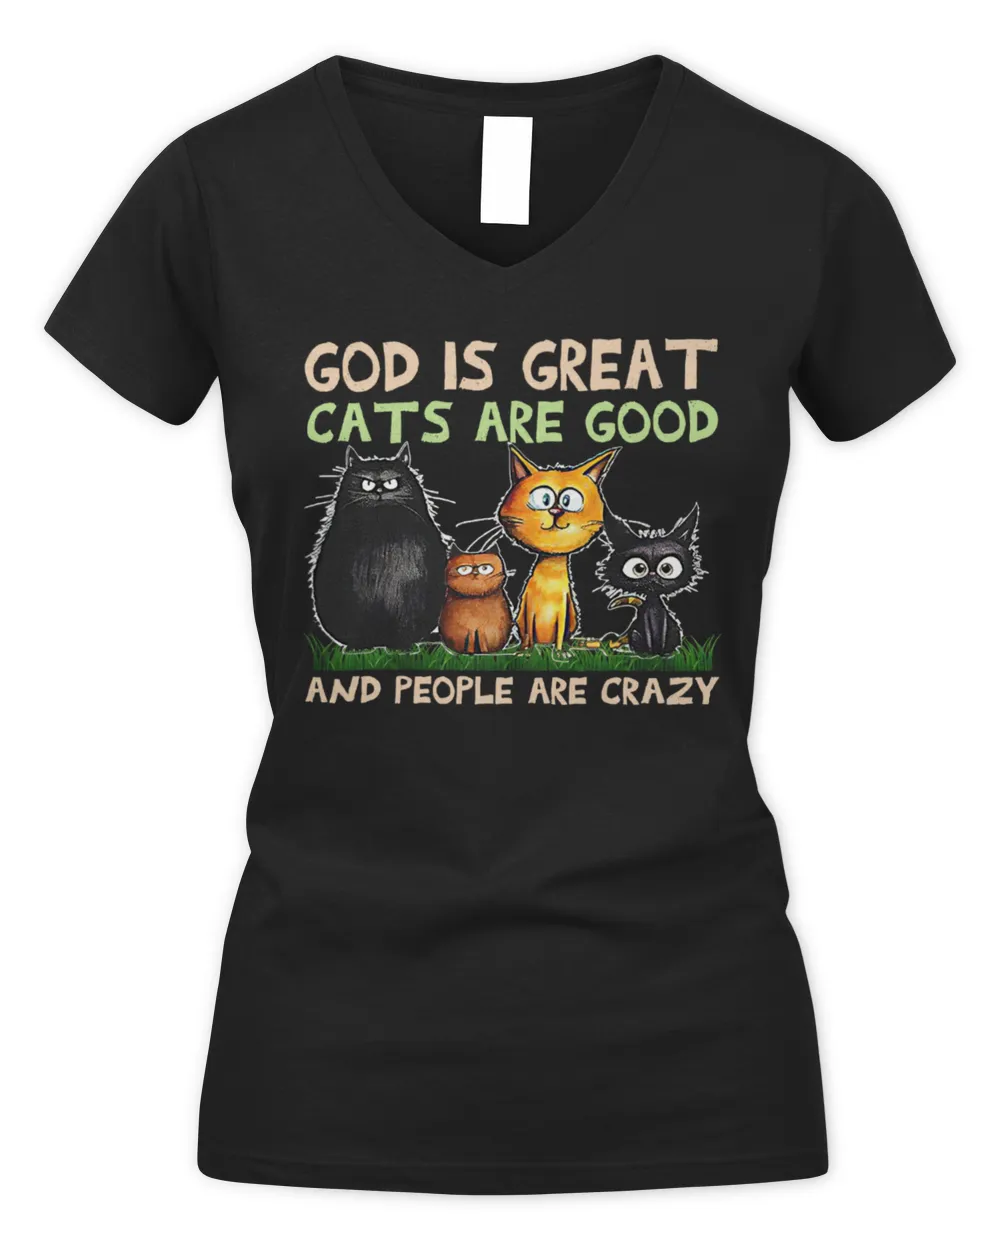 God is great cats are good